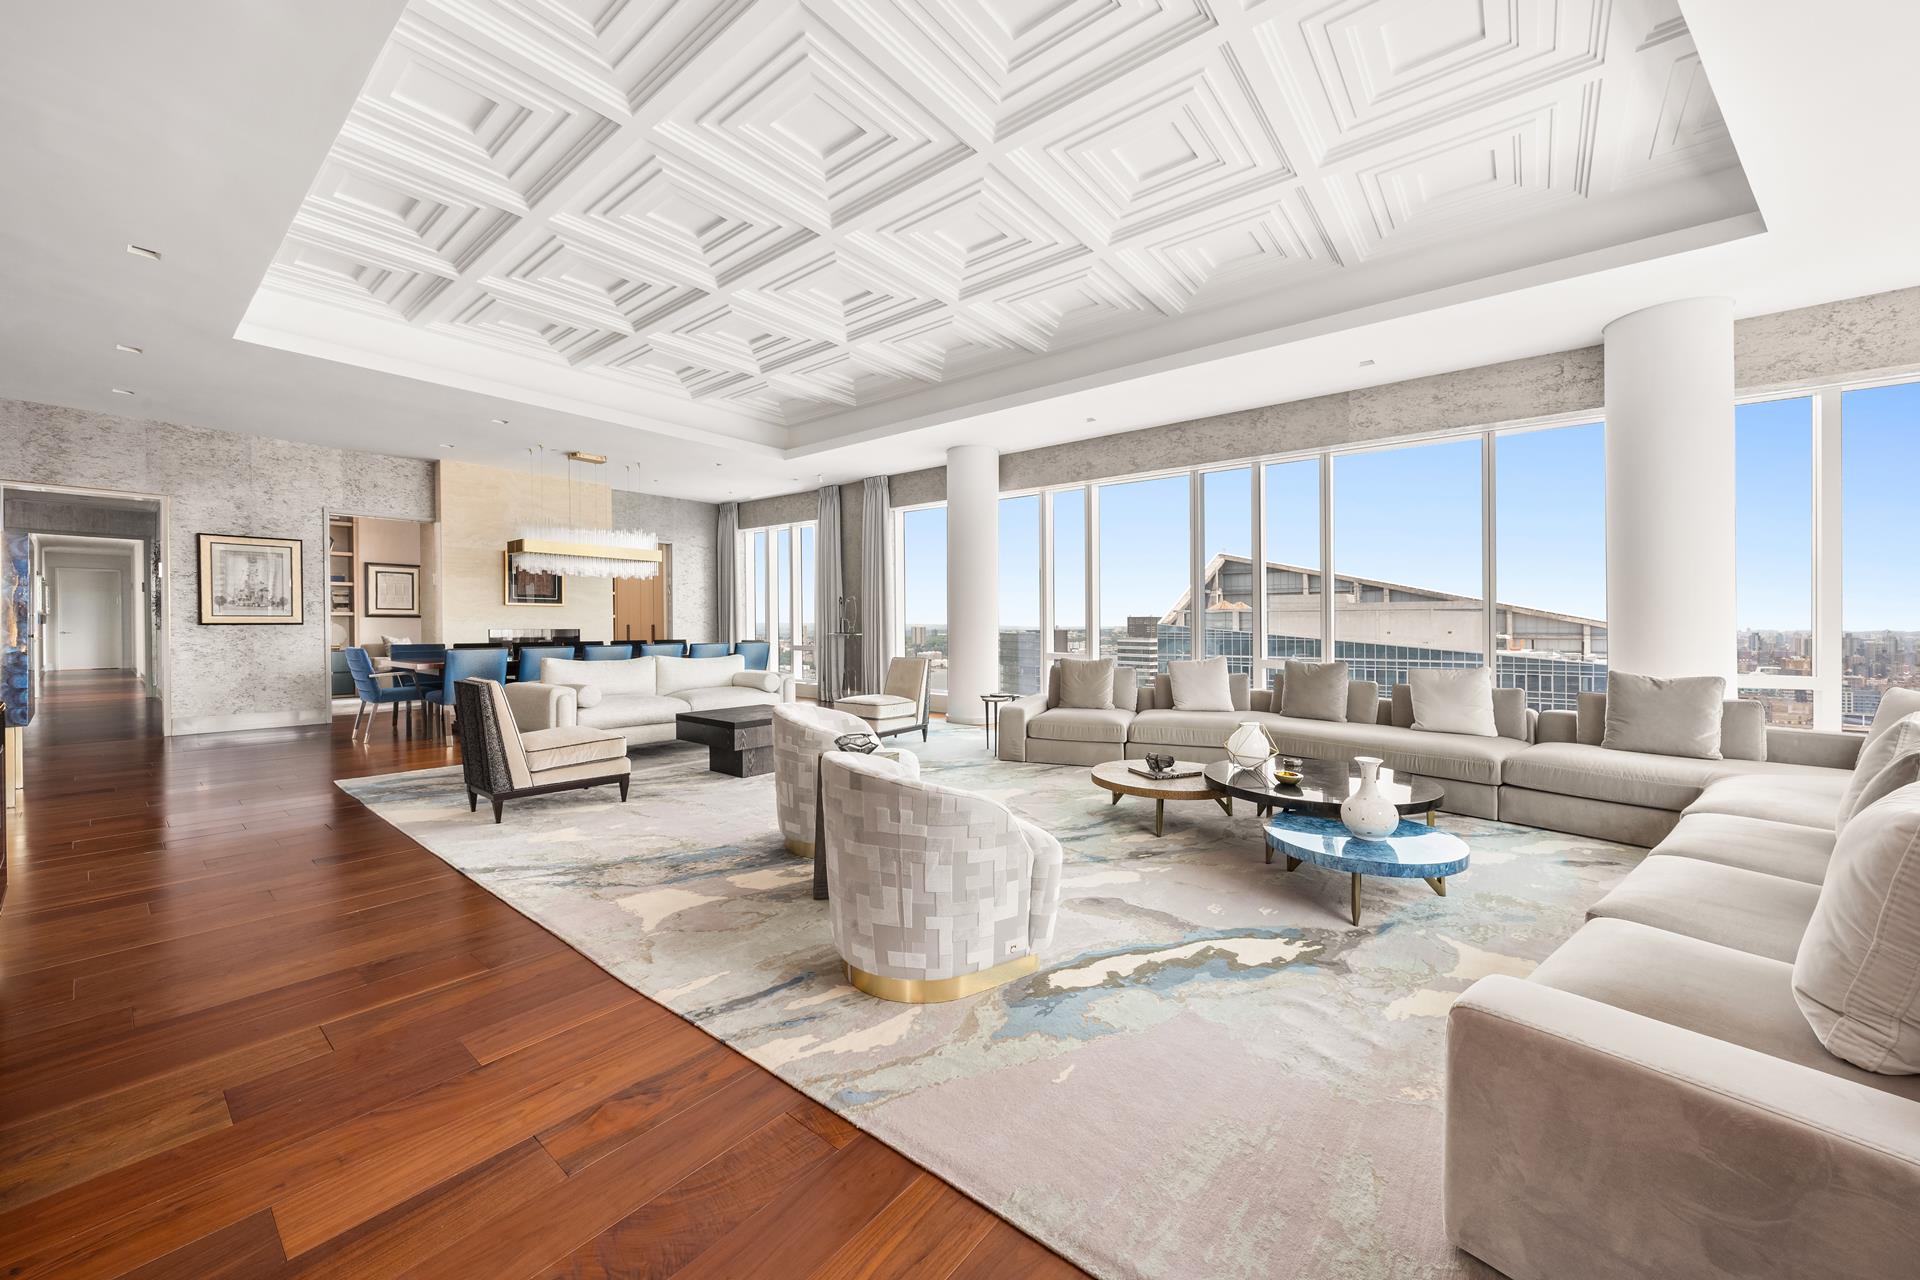 1 West End Avenue Pha, Lincoln Square, Upper West Side, NYC - 4 Bedrooms  
5.5 Bathrooms  
8 Rooms - 